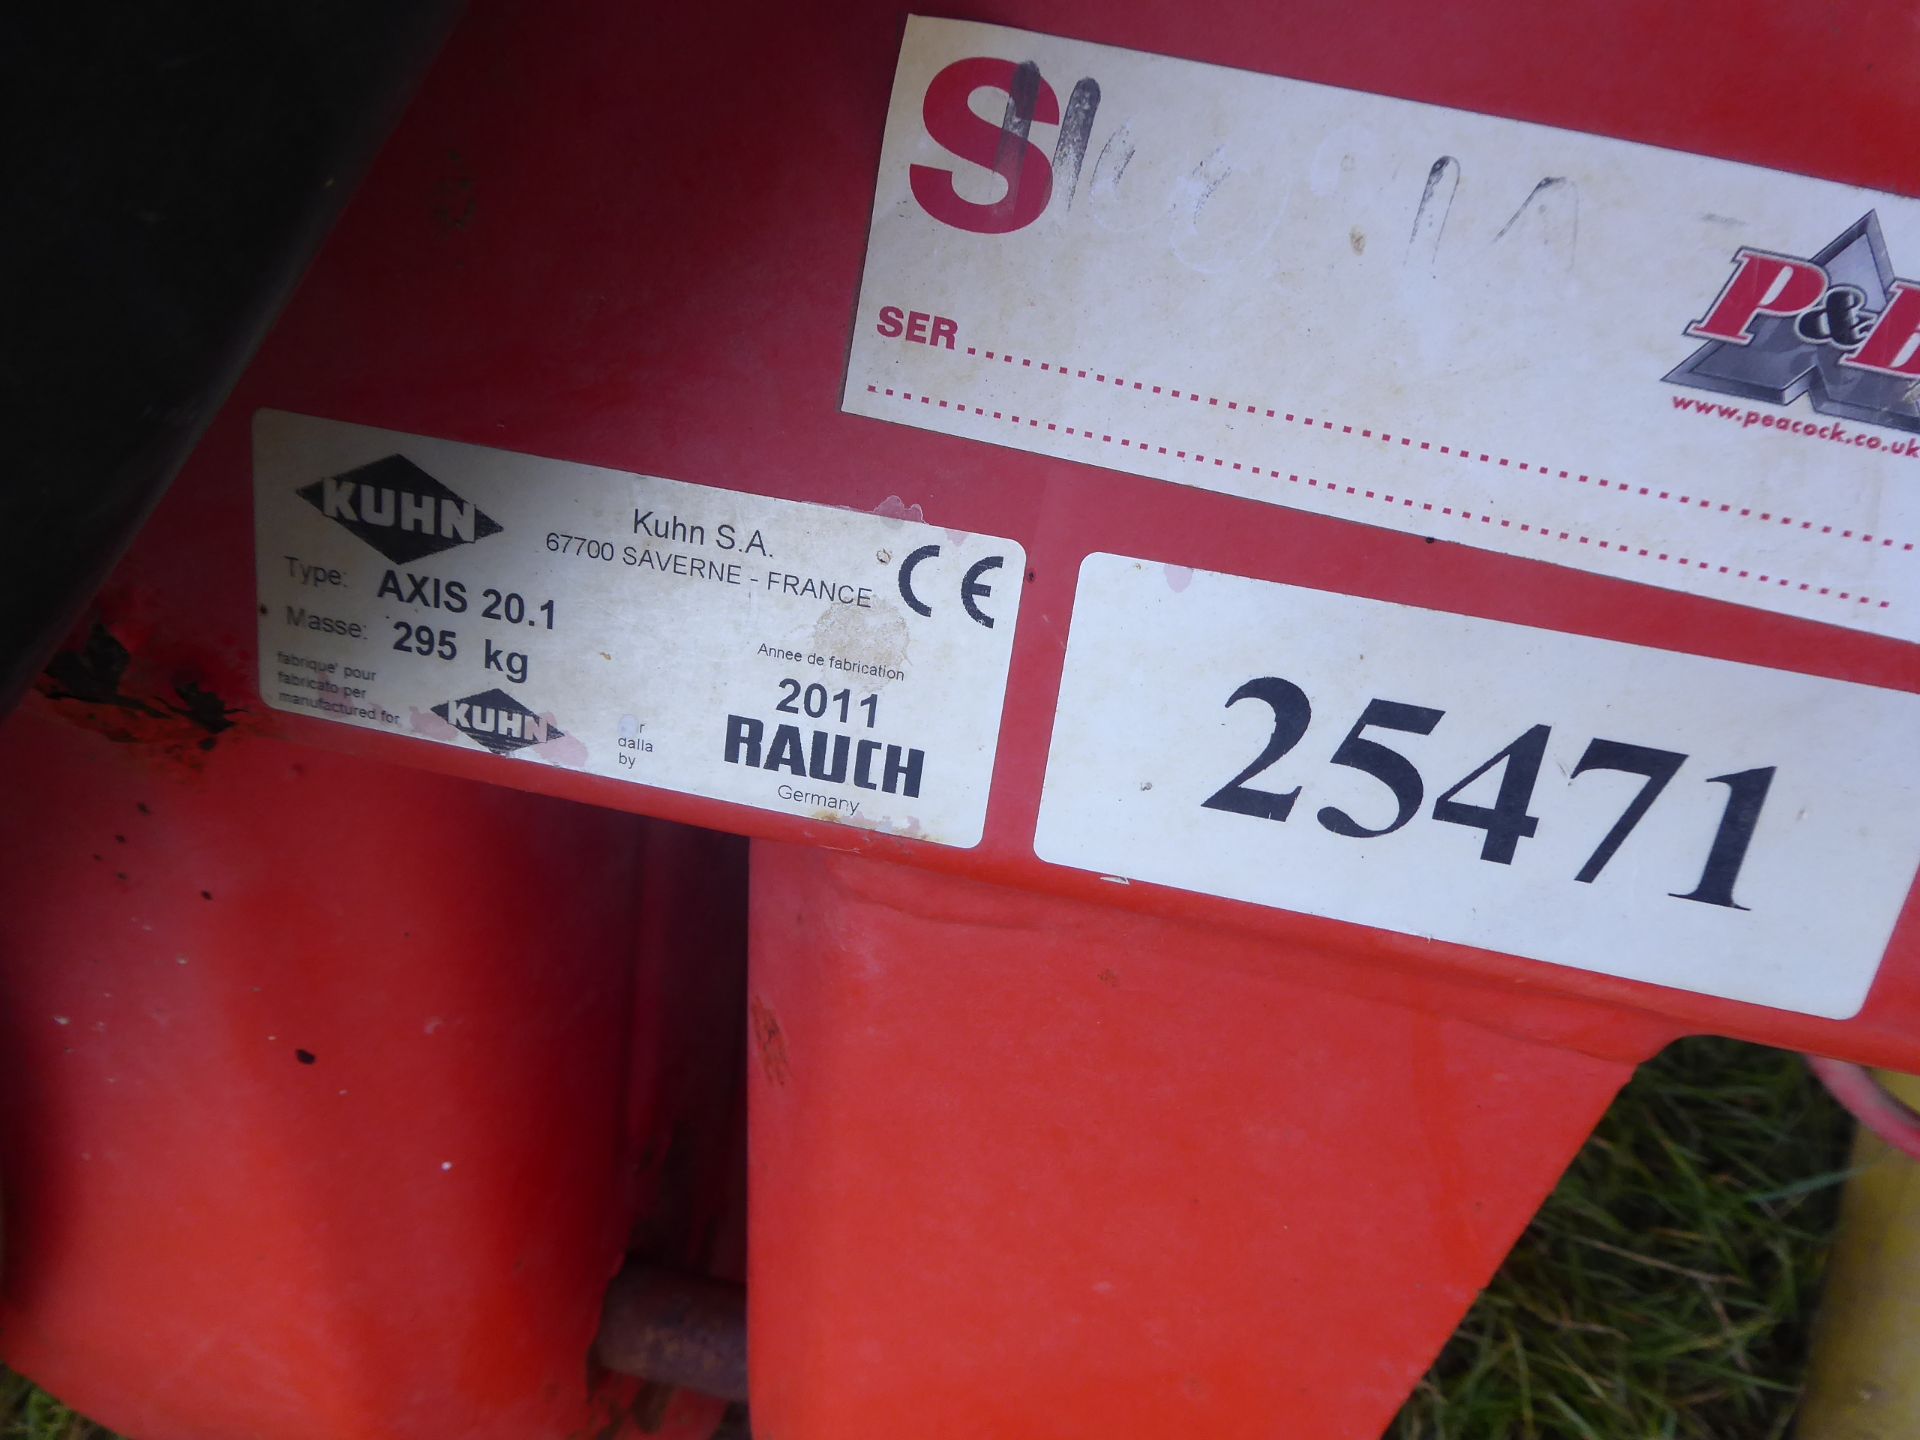 Kuhn Axis 20.1 12-18m spreader hardcoated discs, 2011, GWO - Image 2 of 4